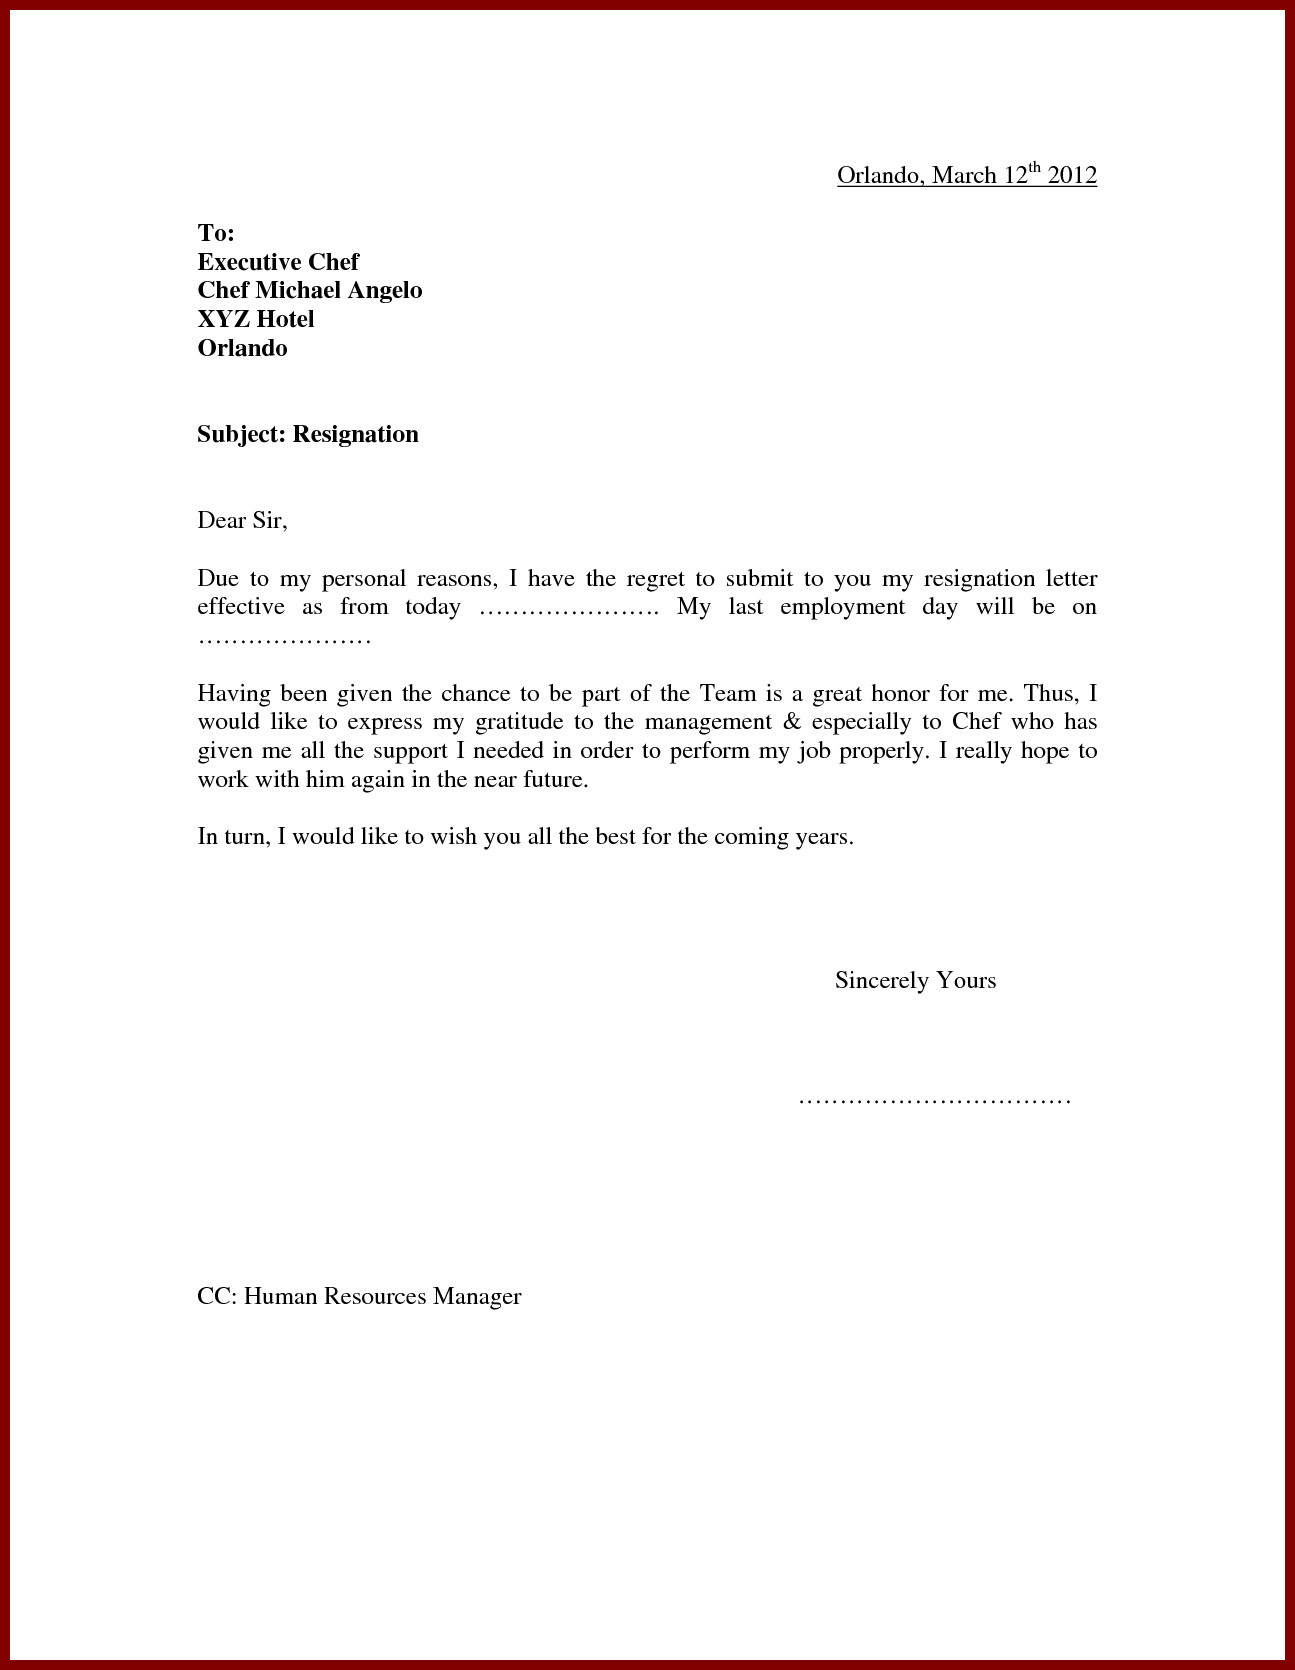 Resignation Letter Personal Reason Simple Resignation Letter Sample for Personal Reasons